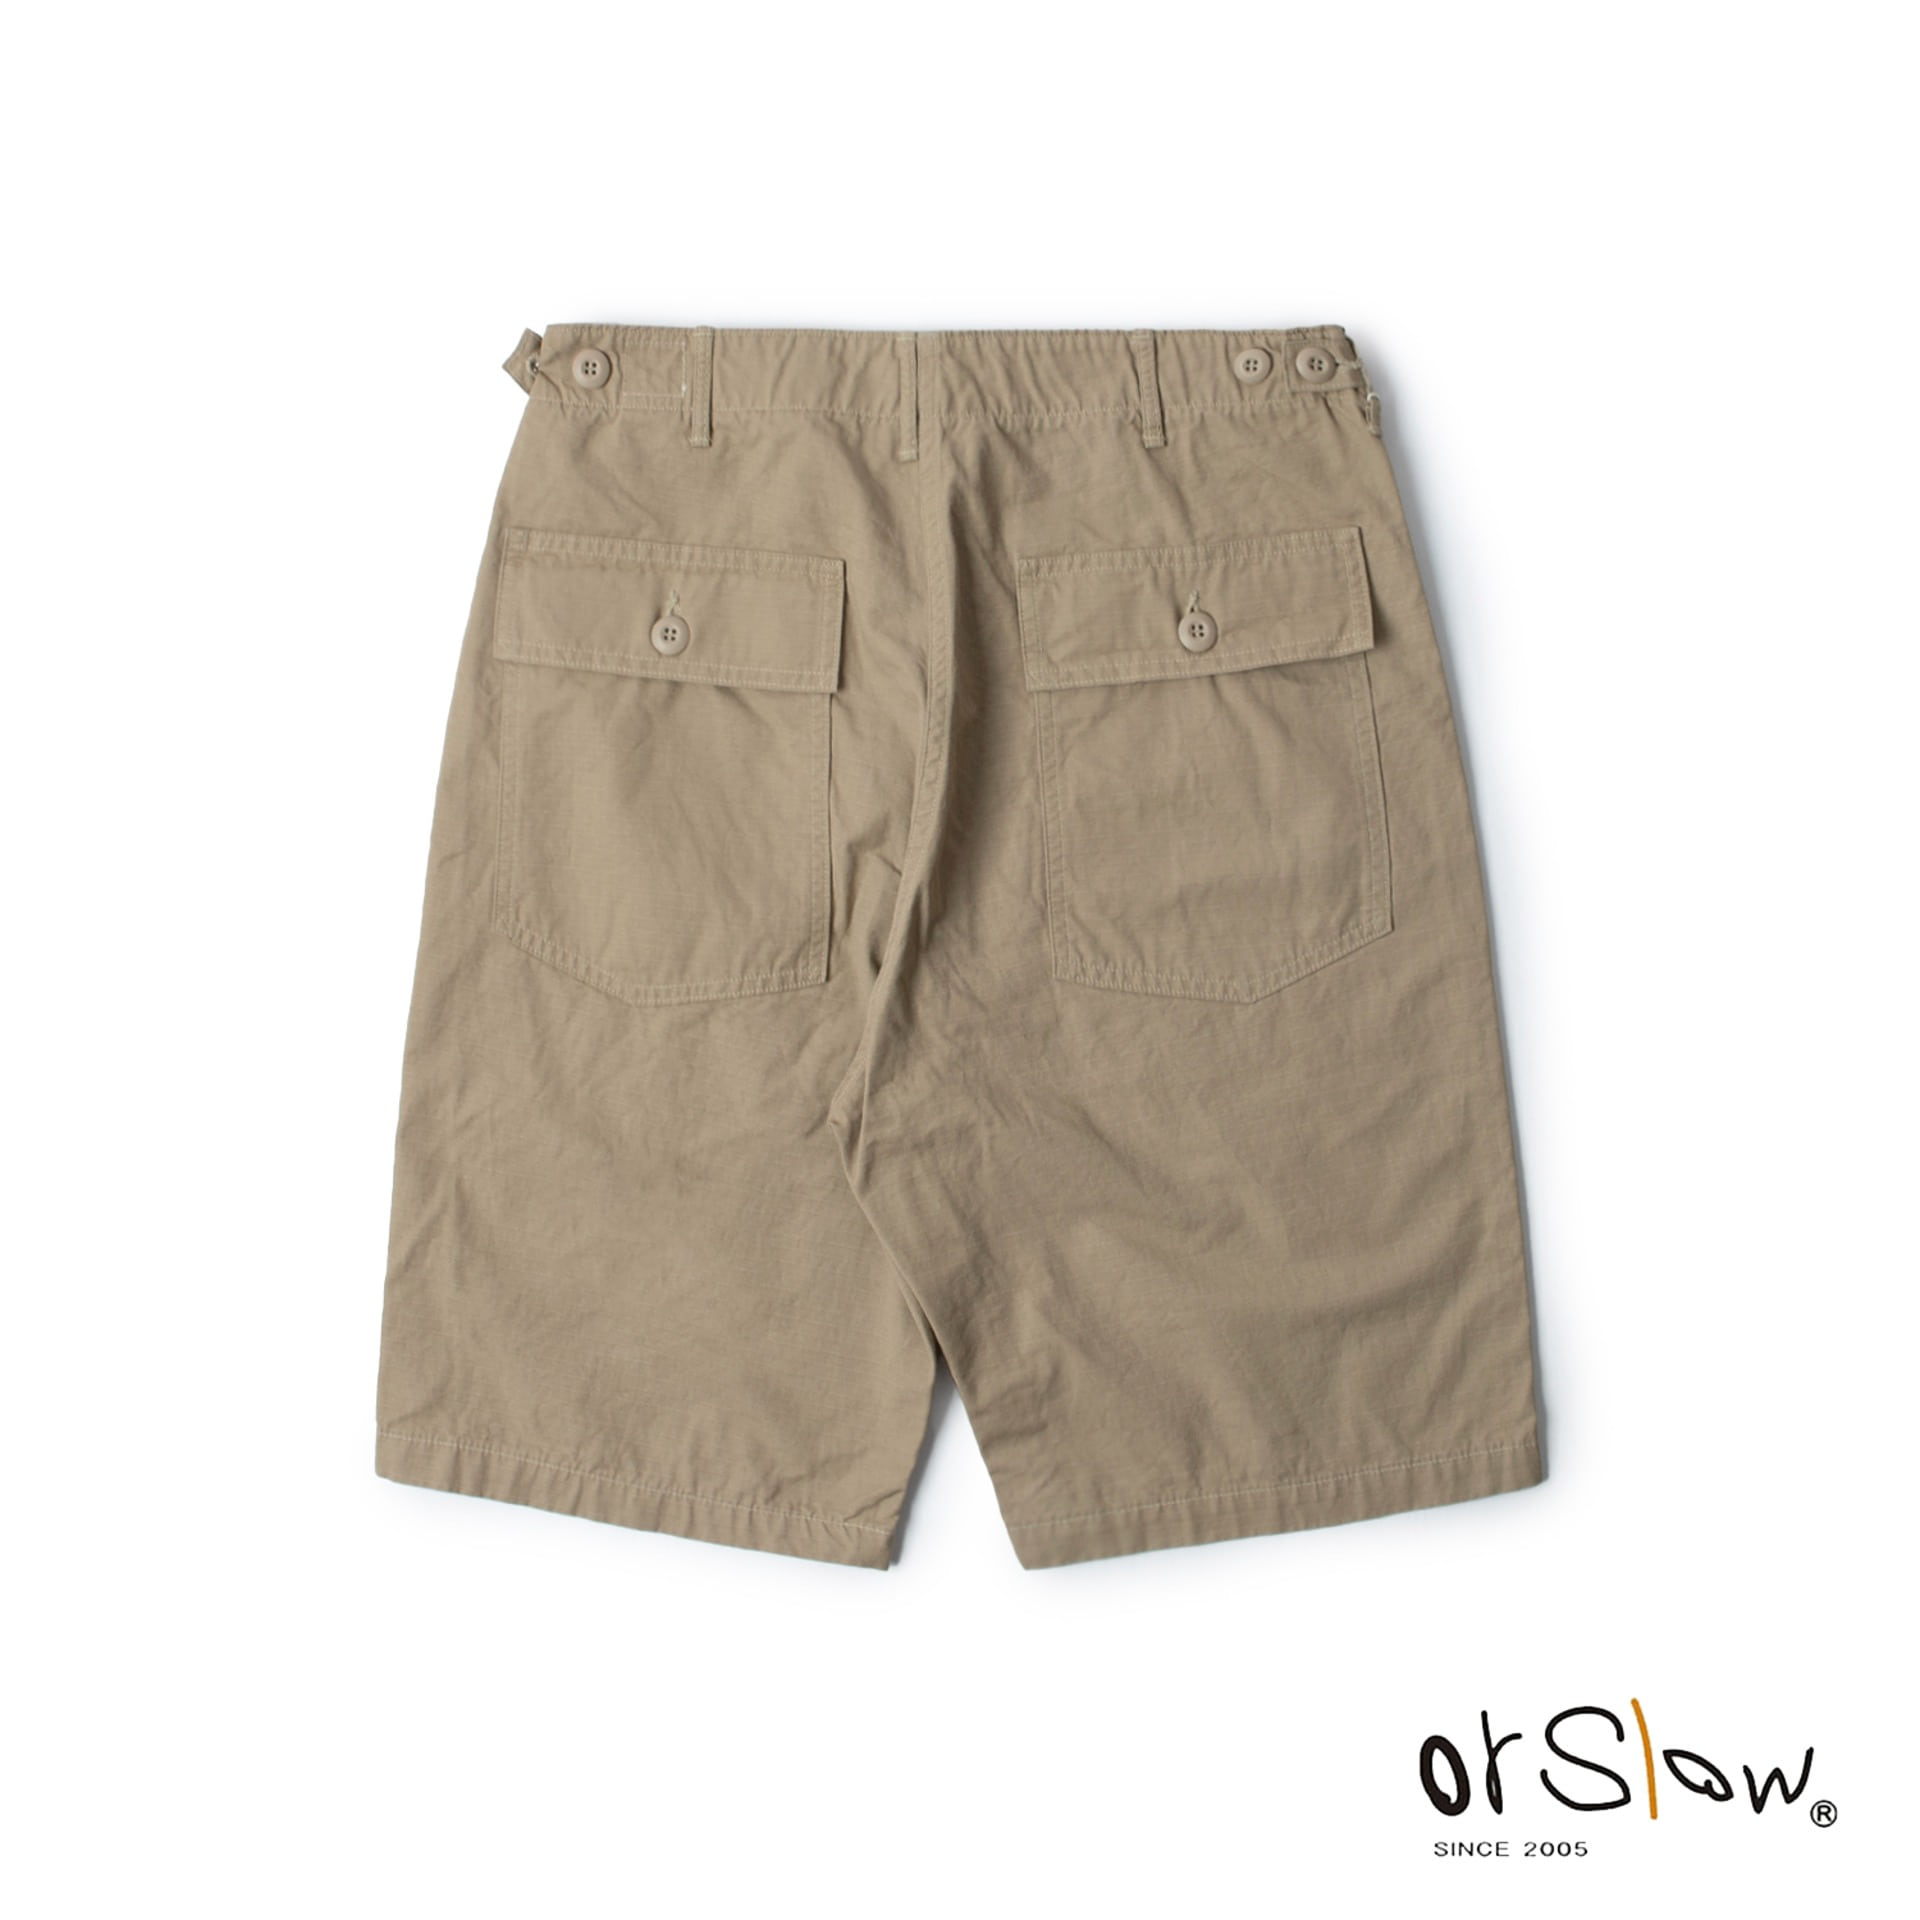 US ARMY FATIGUE SHORTS RIPSTOP (Beige)